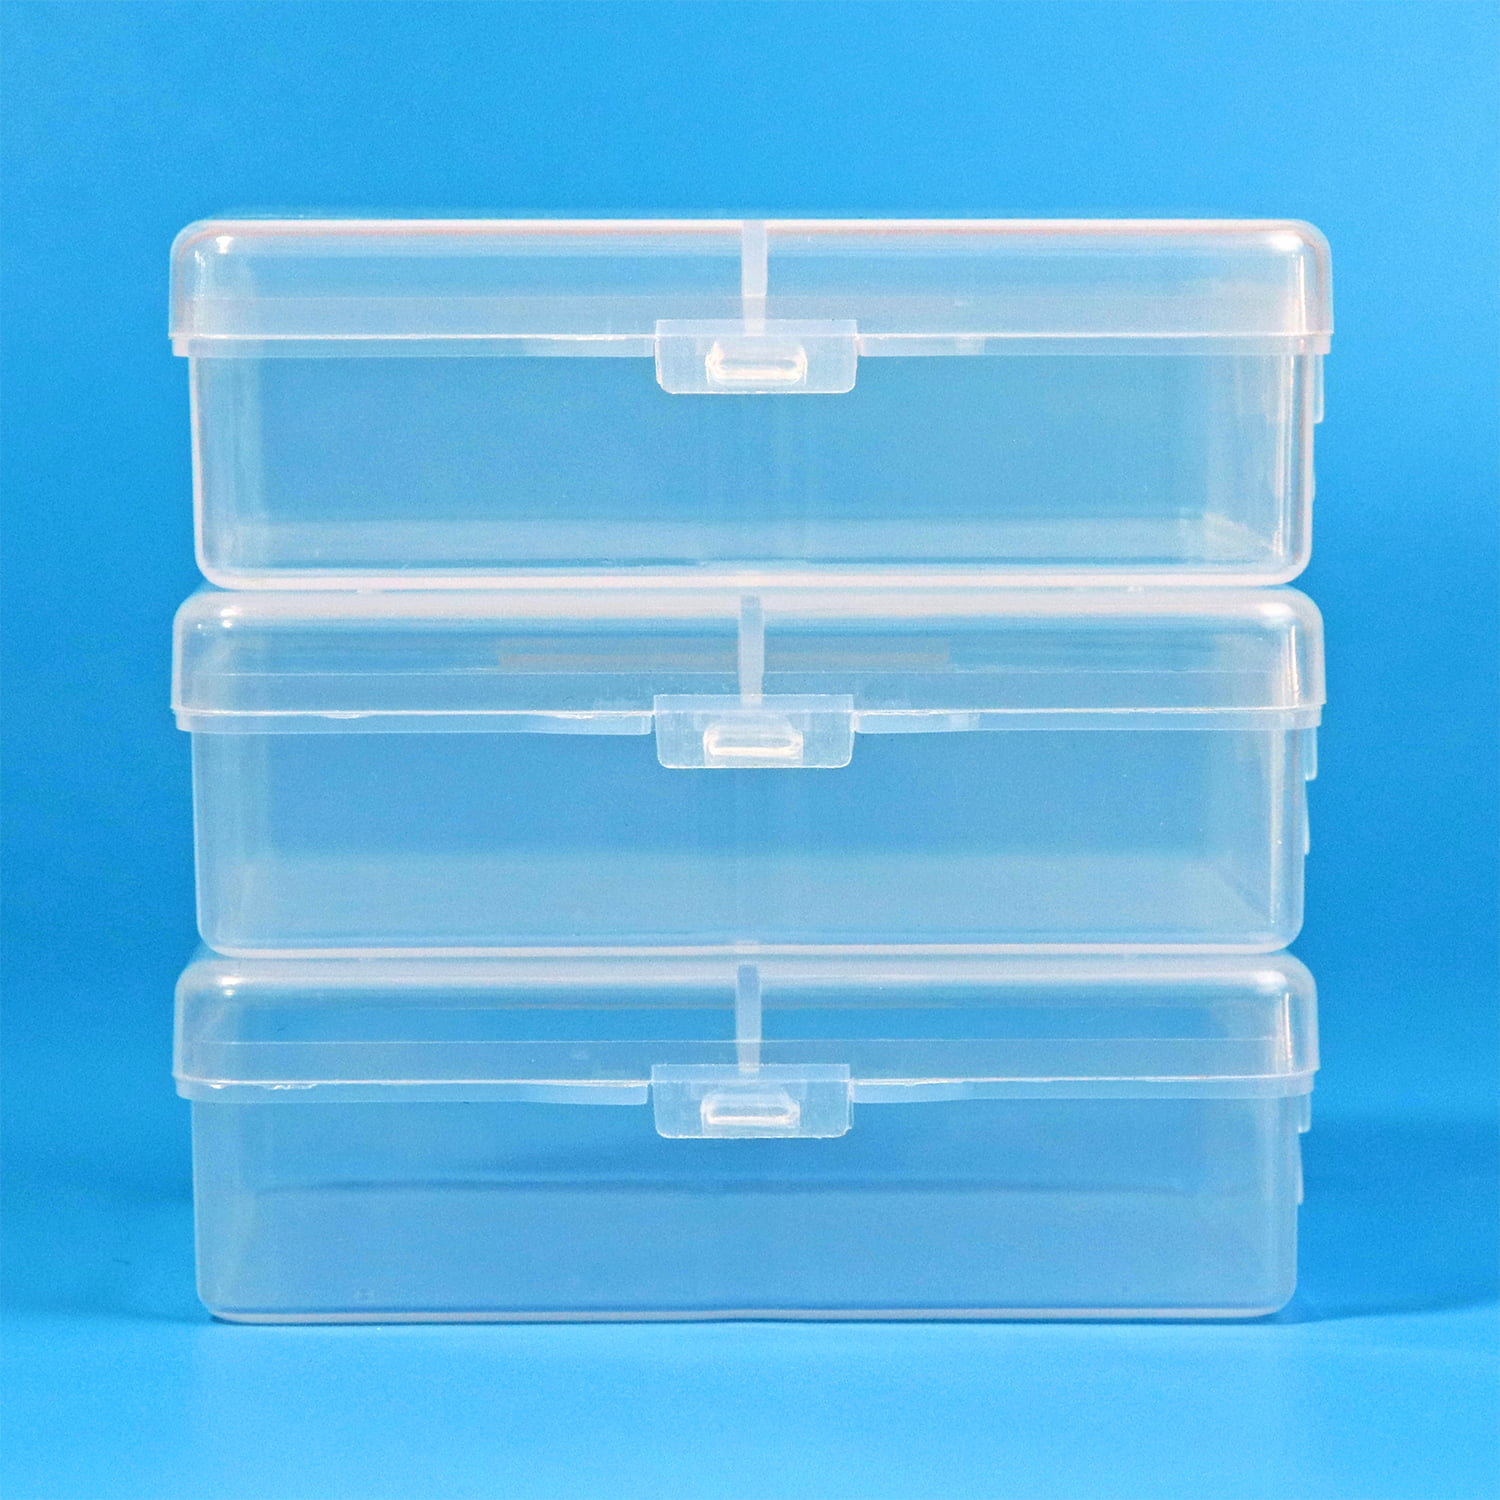 Clear Plastic Box with Removable Lid 2 L x 2 W x 3/4 Hgt.